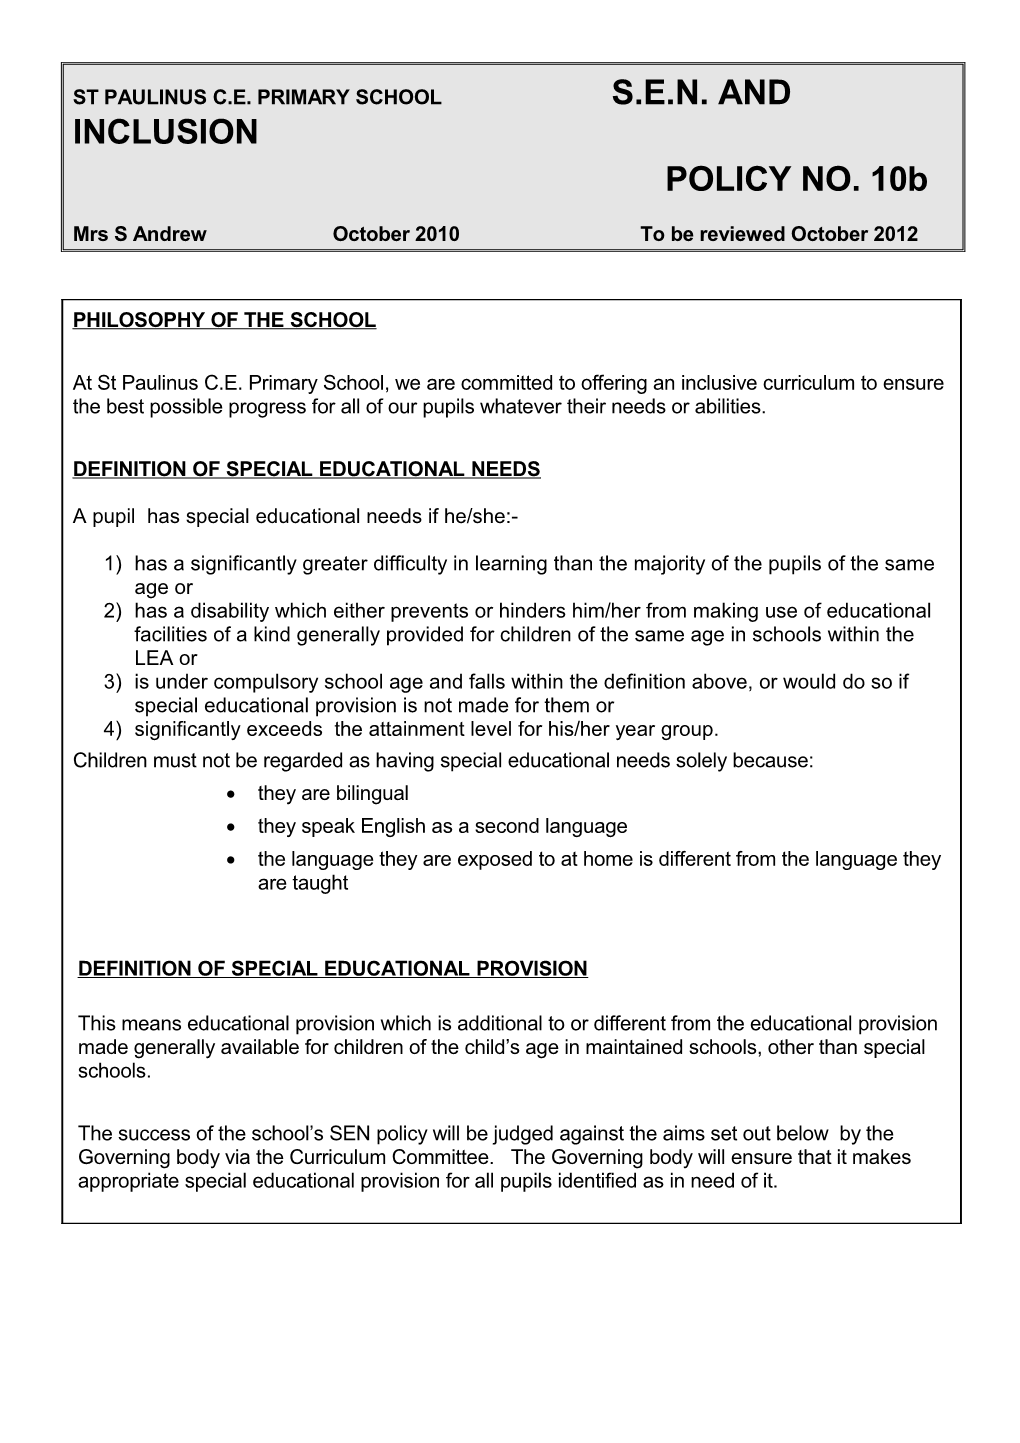 Definition of Special Educational Needs